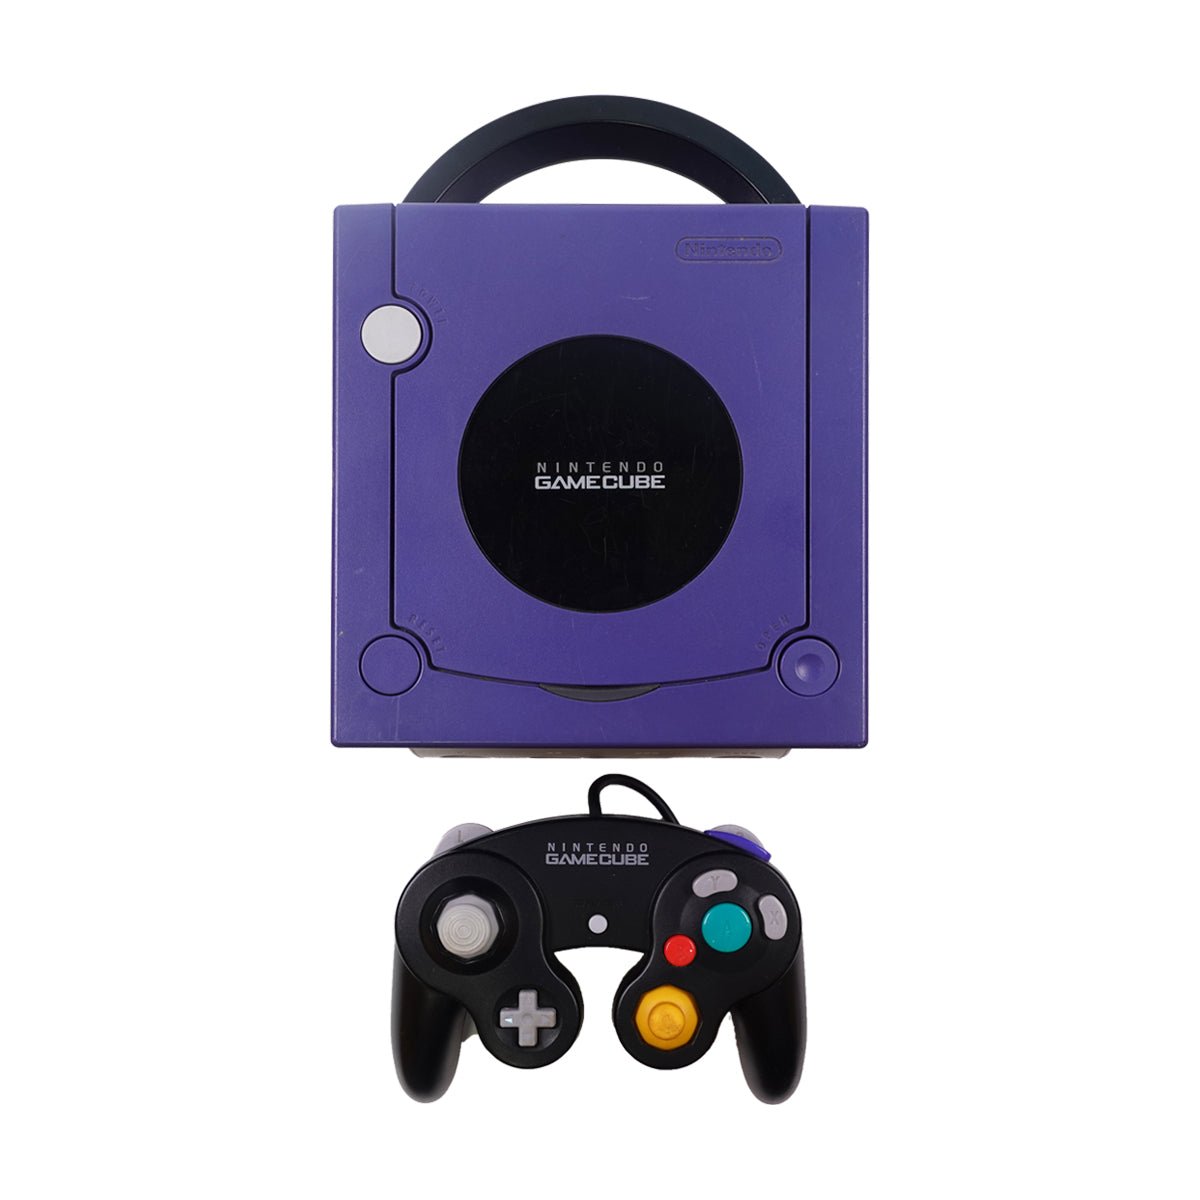 (Pre-Owned) Nintendo GameCube GC Game Console With Black Controller - Blue - ريترو - Store 974 | ستور ٩٧٤